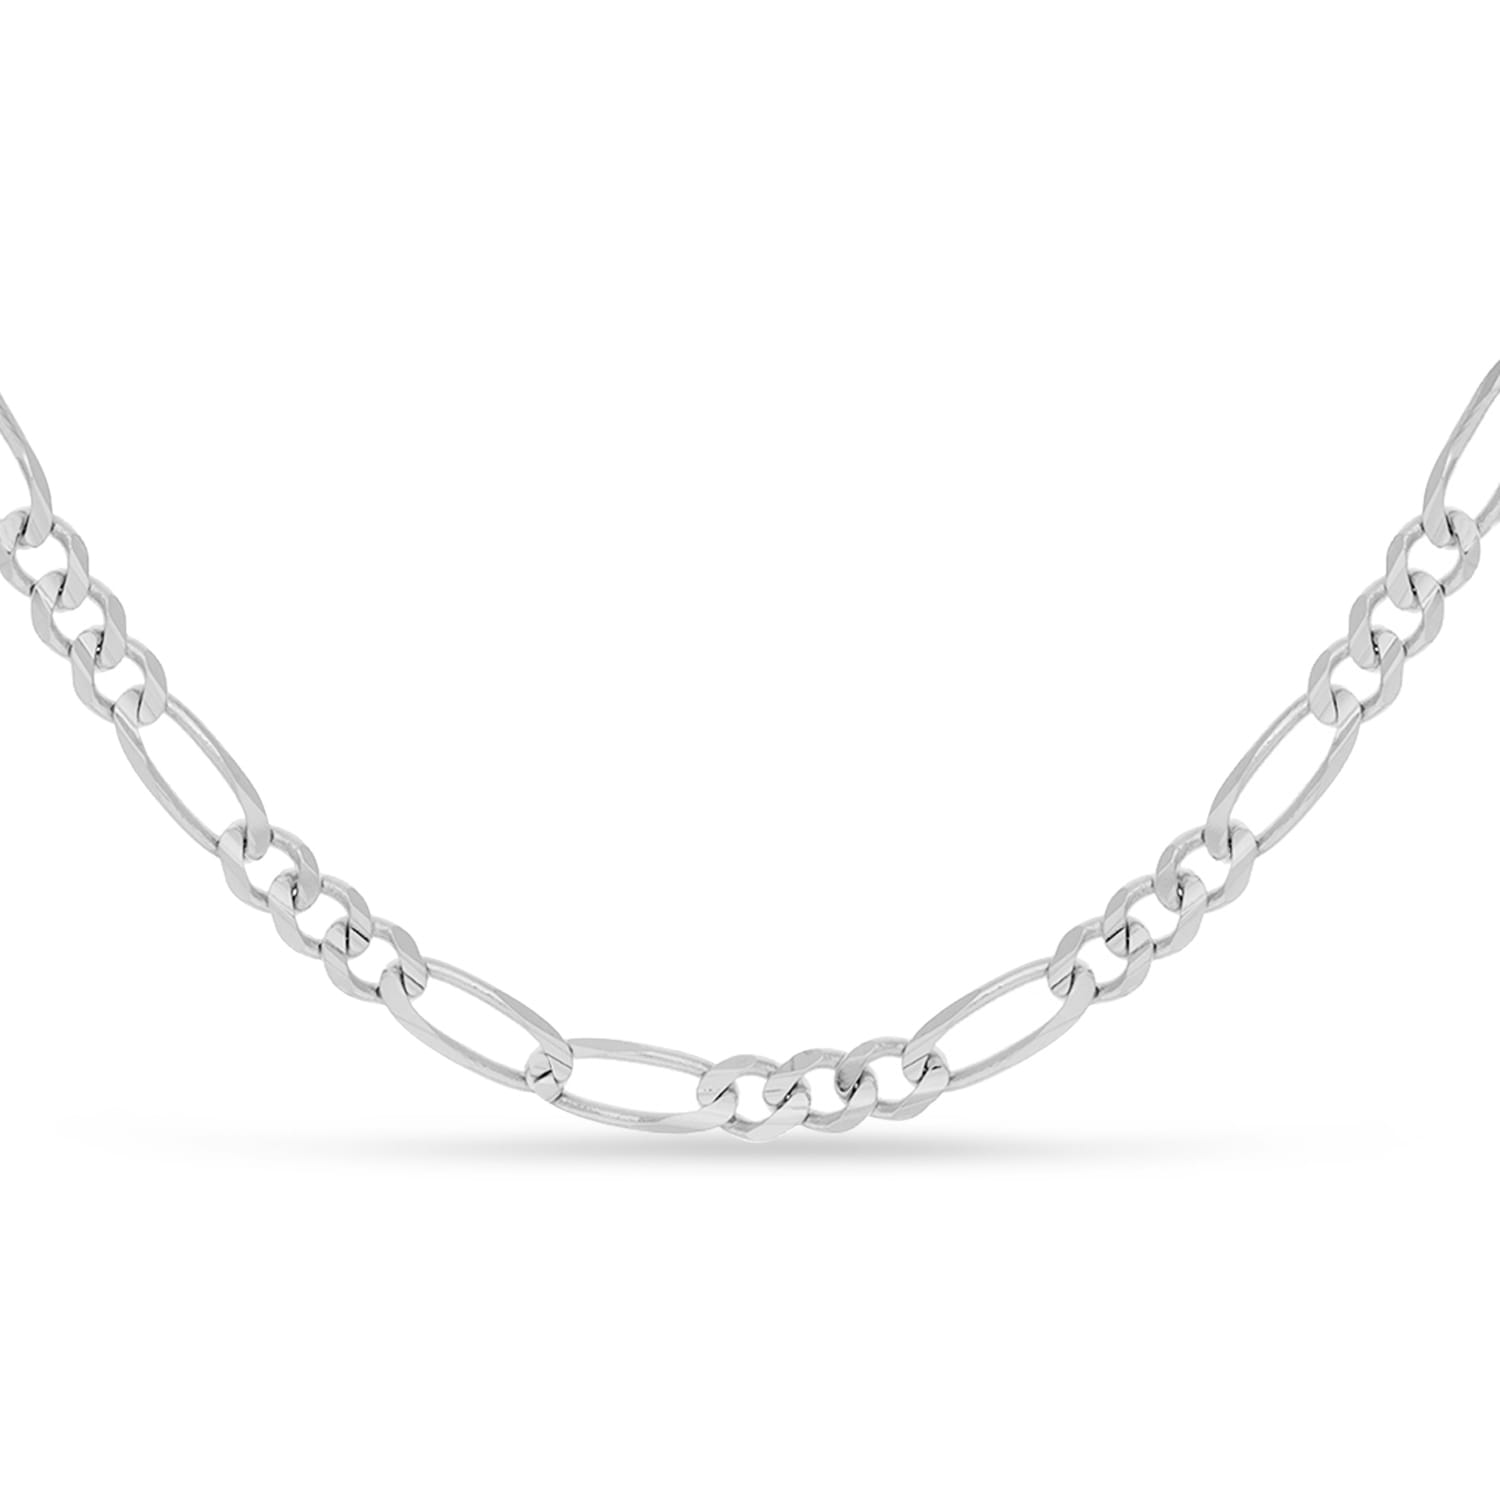 Large Figaro Chain Necklace With Lobster Lock 14k White Gold